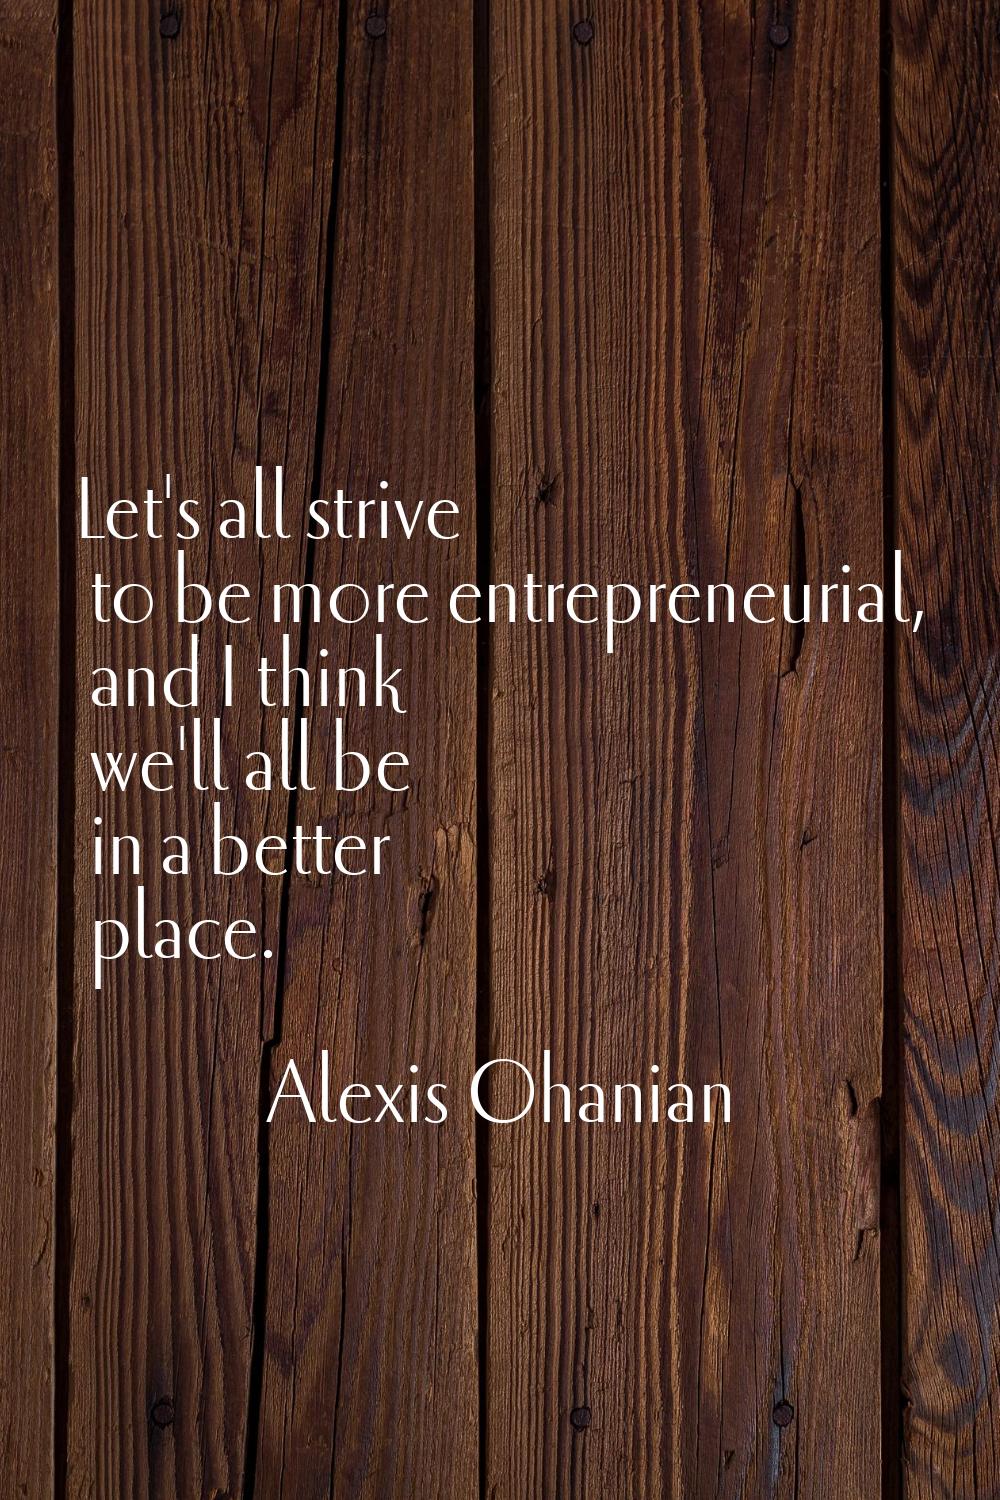 Let's all strive to be more entrepreneurial, and I think we'll all be in a better place.